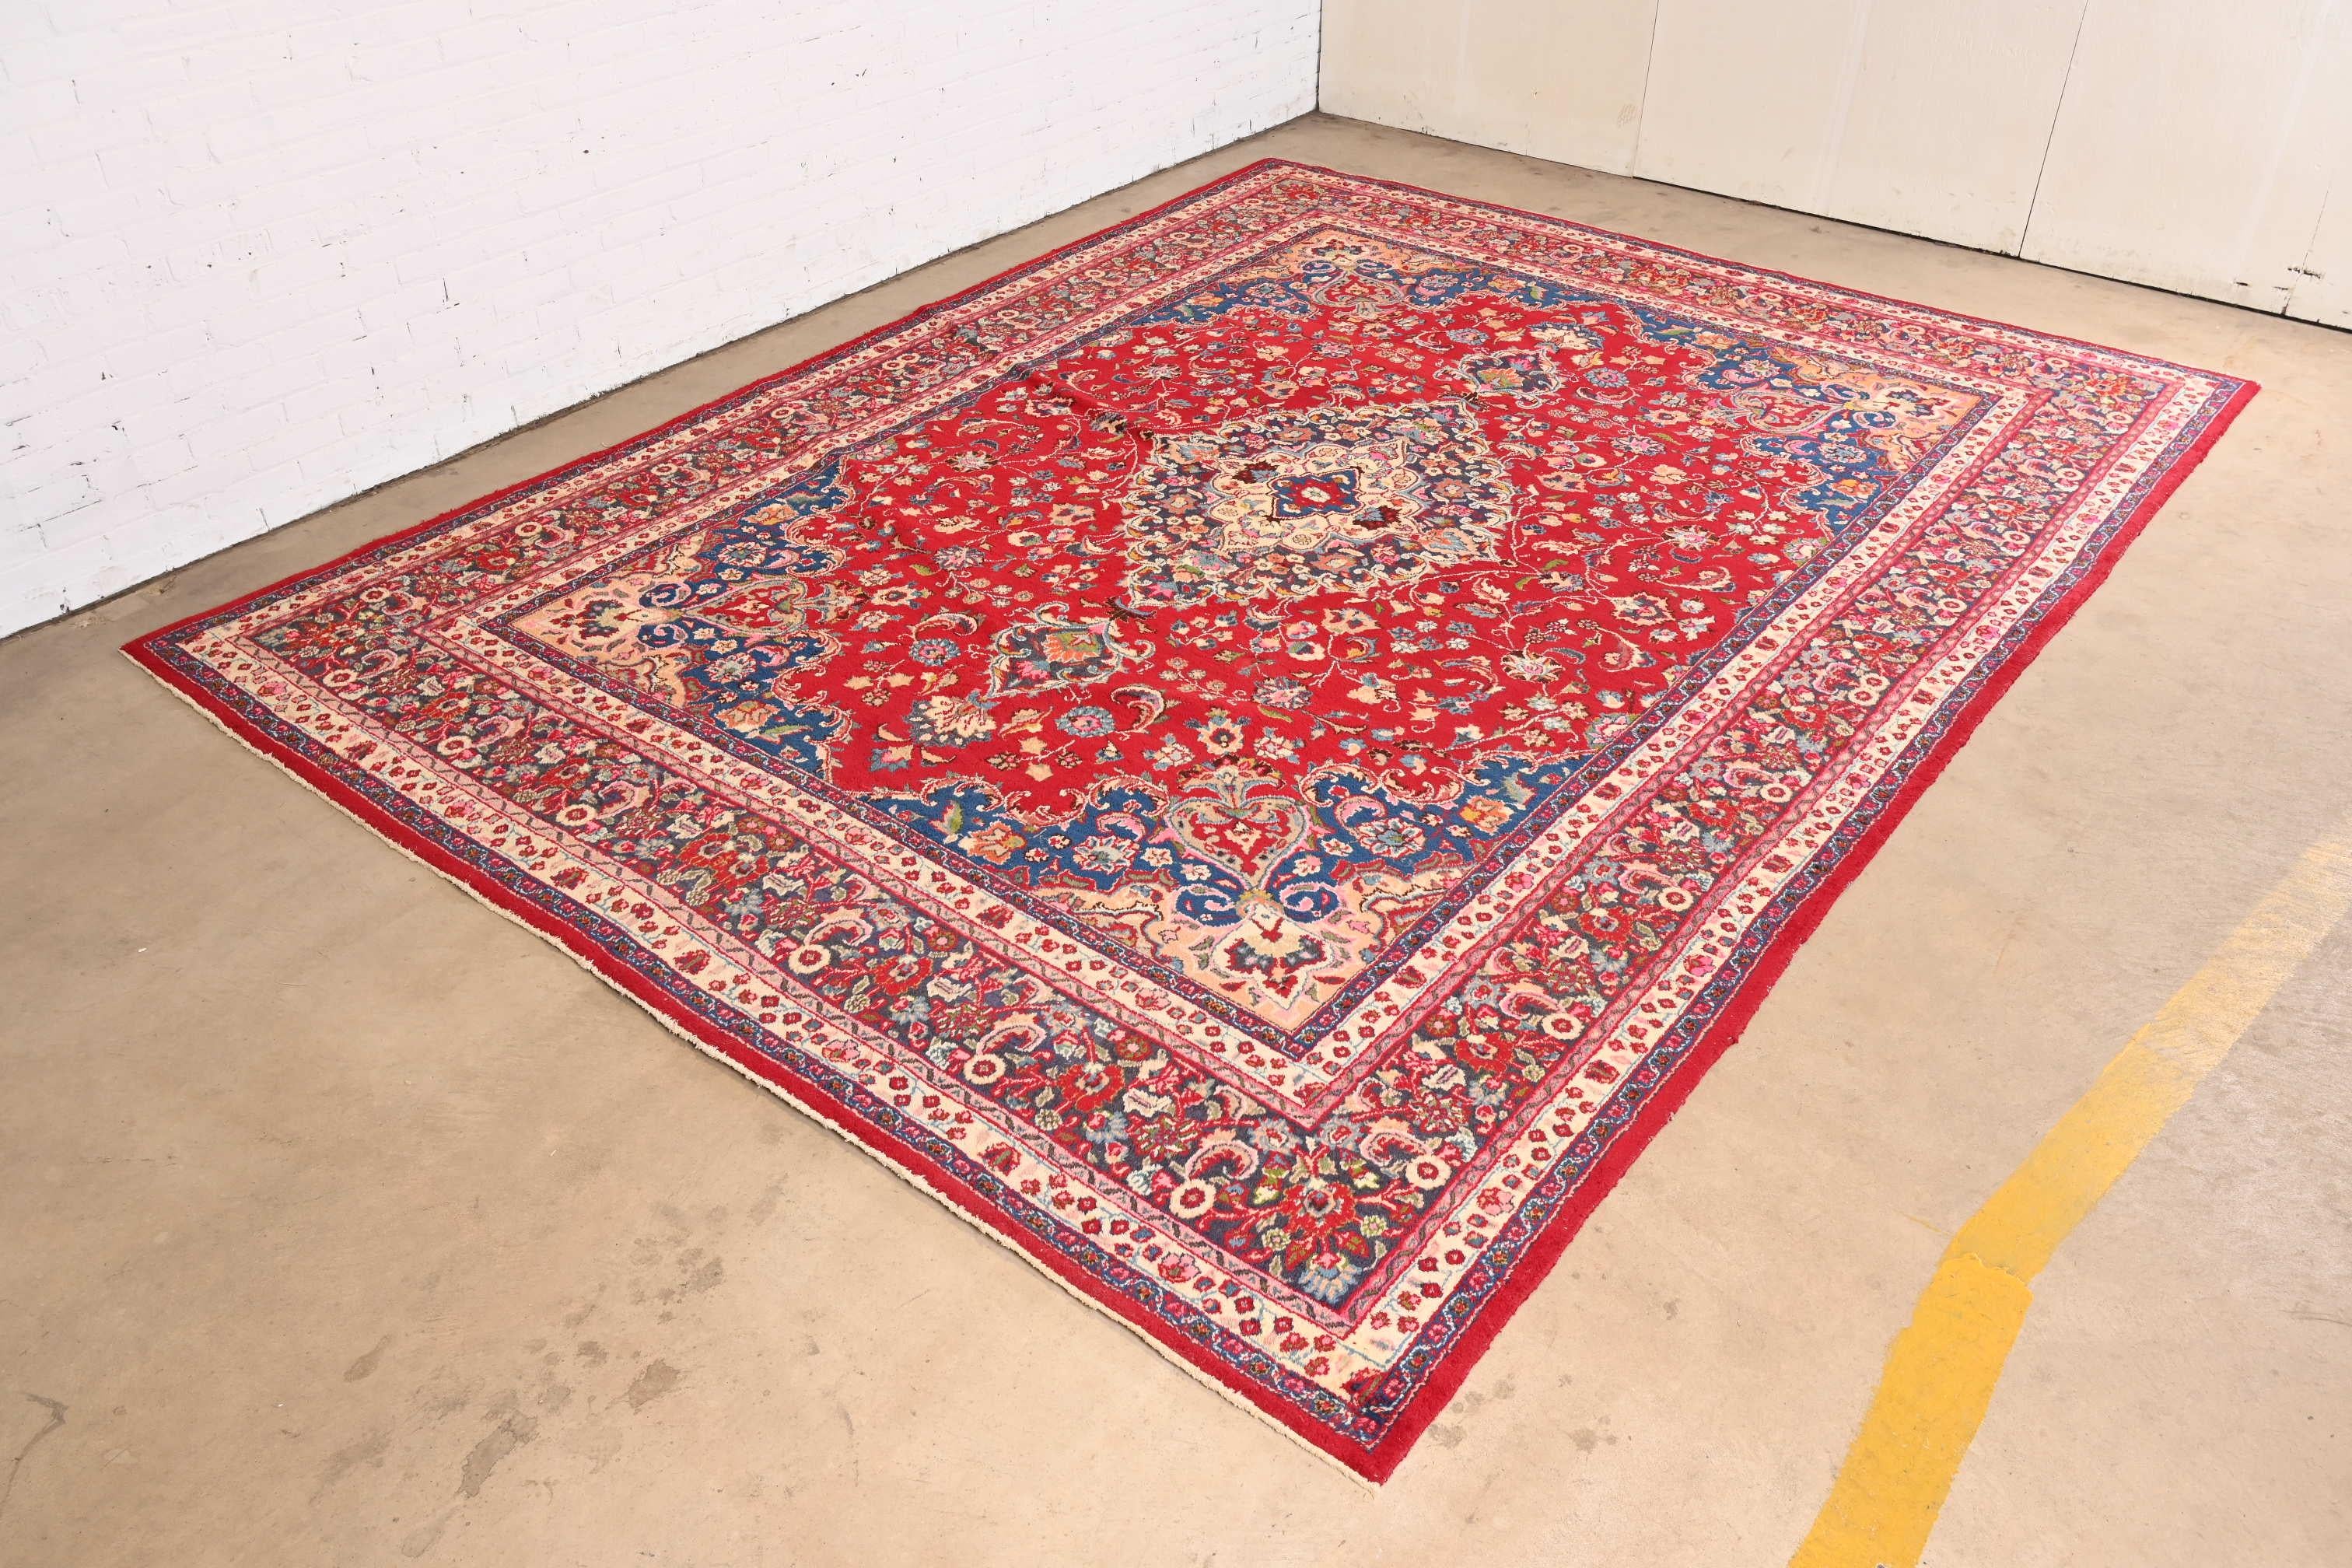 20th Century intage Hand-Knotted Persian Tabriz Room Size Wool Area Rug For Sale